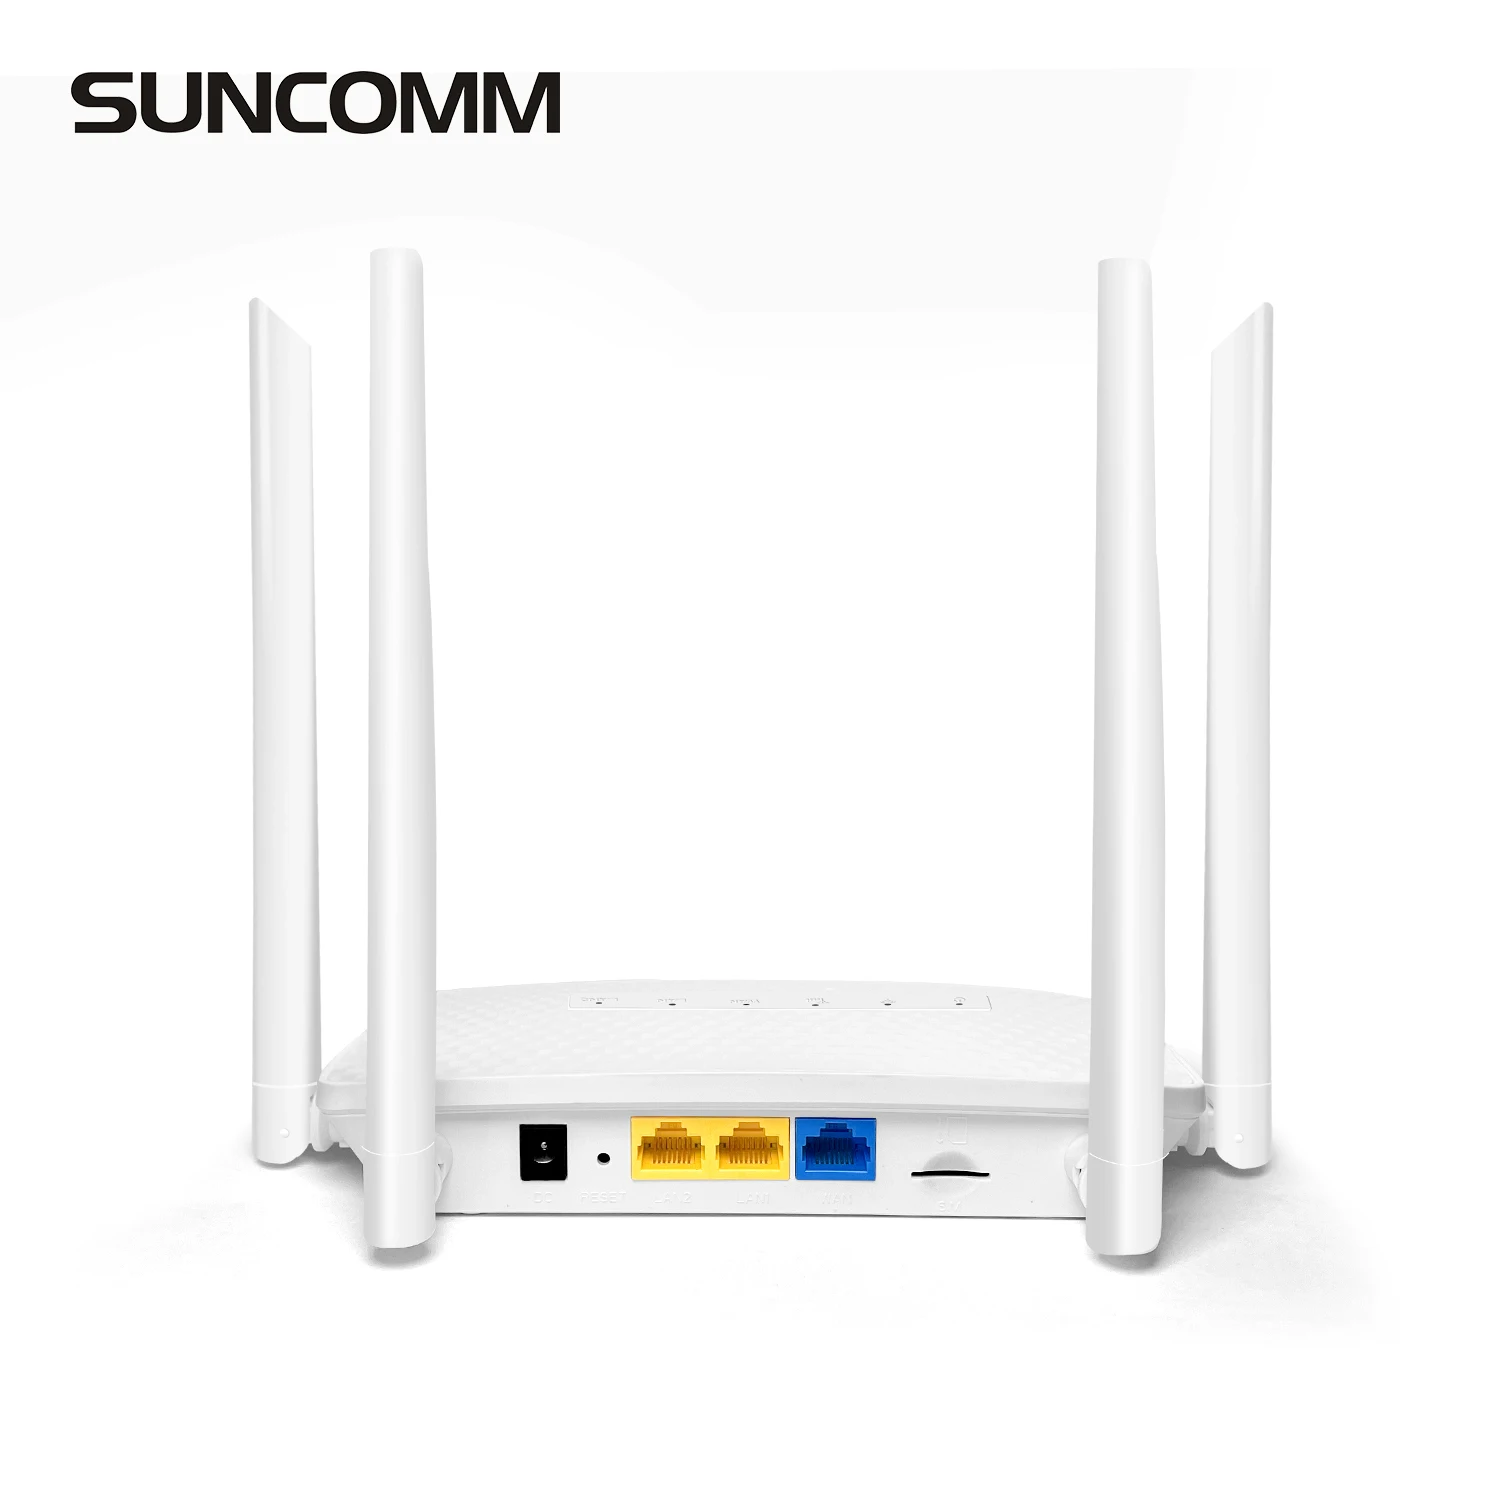 

Hot selling SUNCOMM SE310K Cellular 4G LTE Router With sim card 300Mbps Home CPE 2.4G Wireless WiFi IPV4 Modem 4g Router